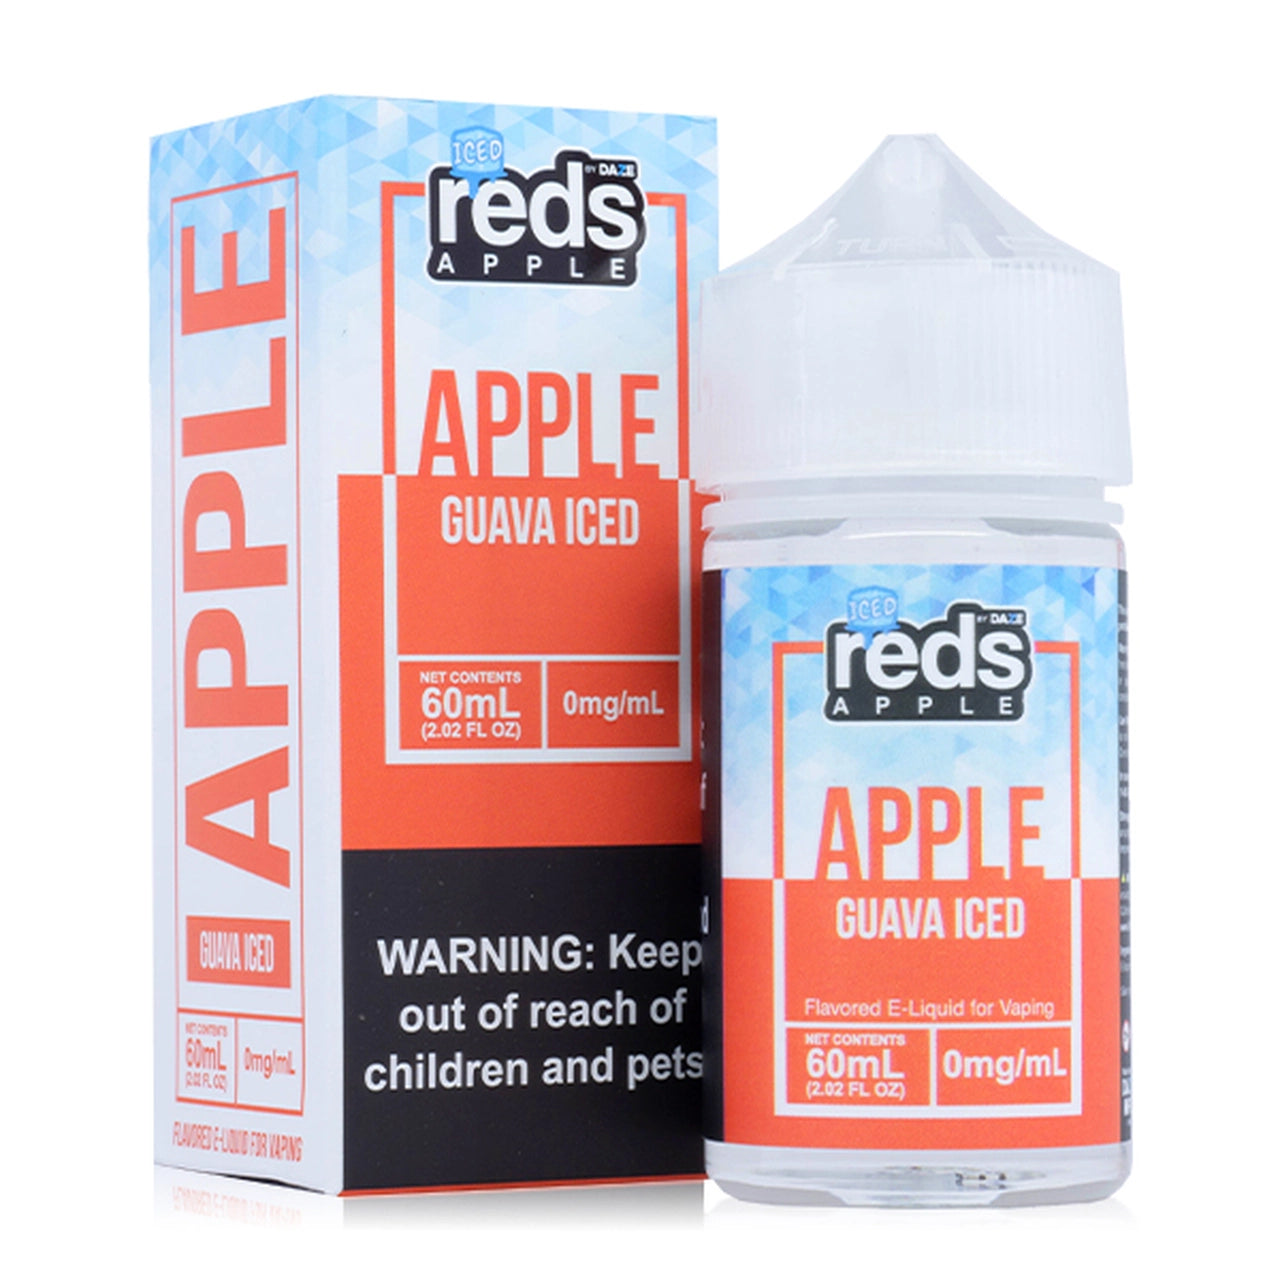 Reds Apple Guava Iced 60ml